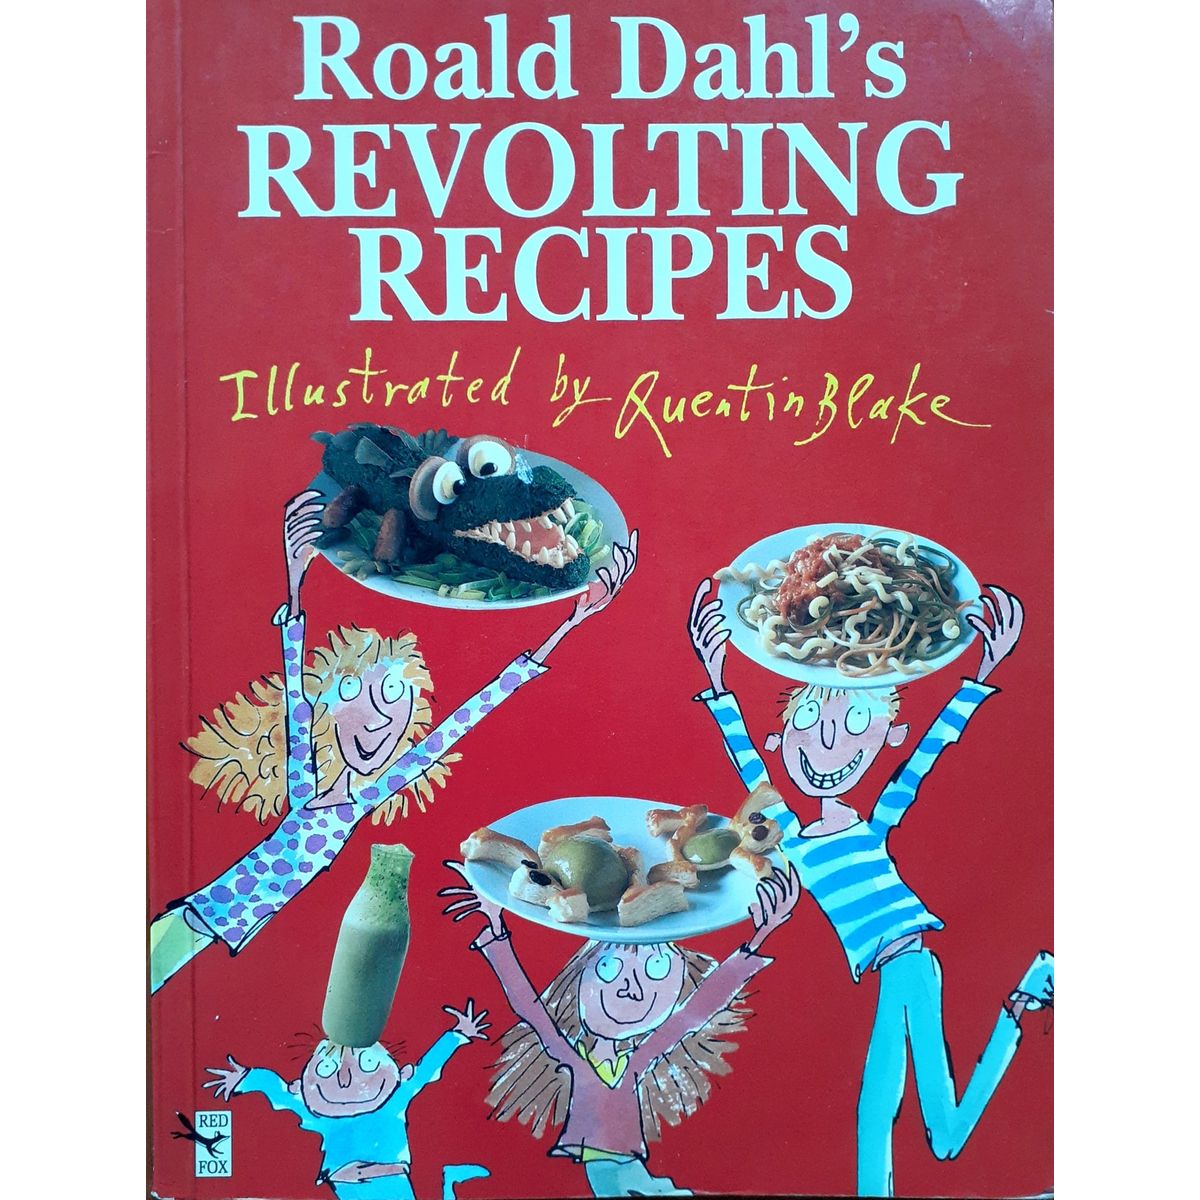 ISBN: 9780099724216 / 0099724219 - Revolting Recipes by Roald Dahl, illustrated by Quentin Blake [1996]